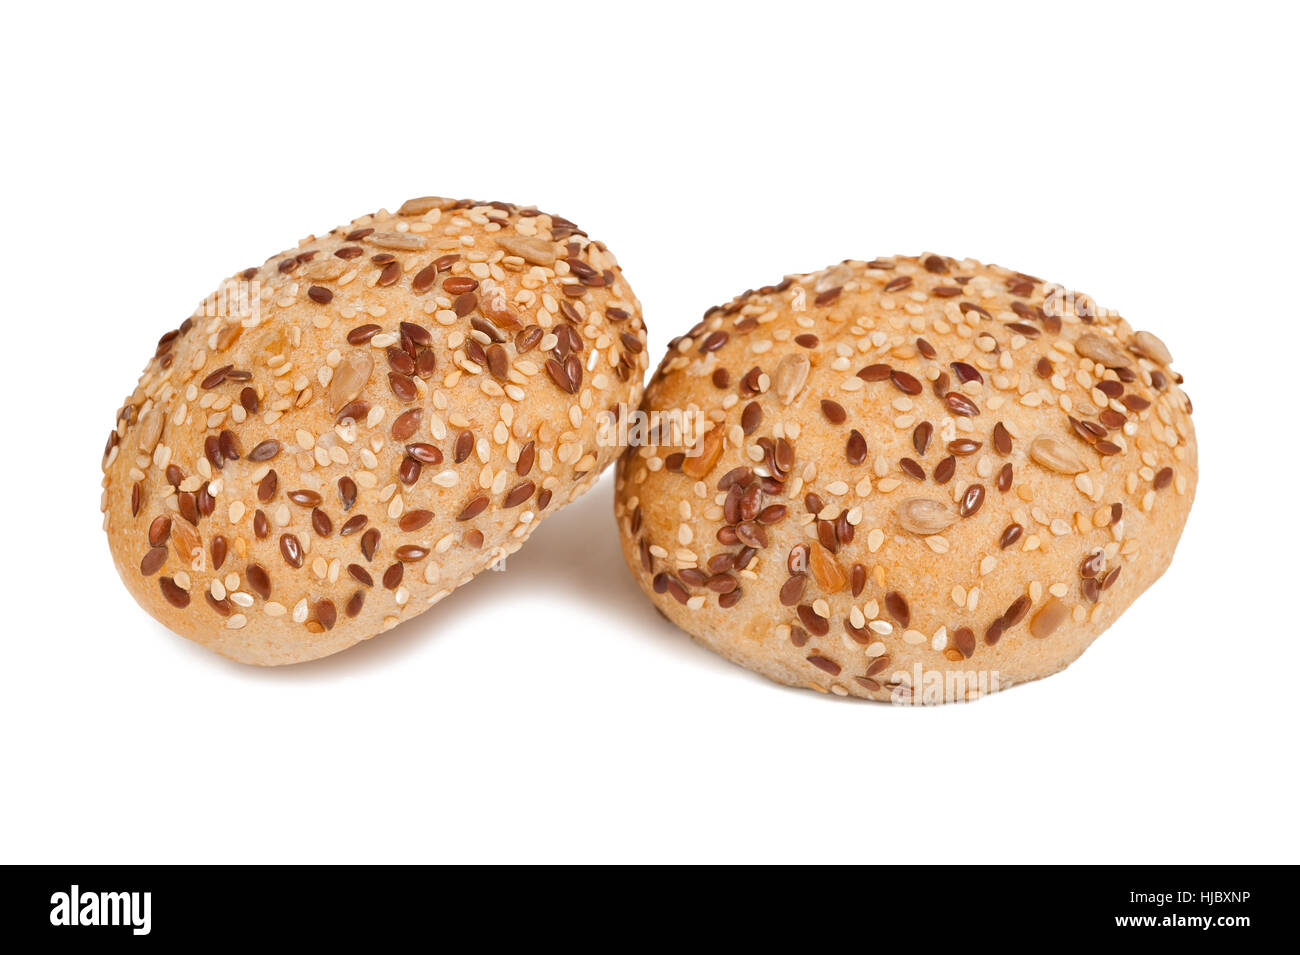 Round sandwich bun with sunflower seeds isolated on white background Stock Photo